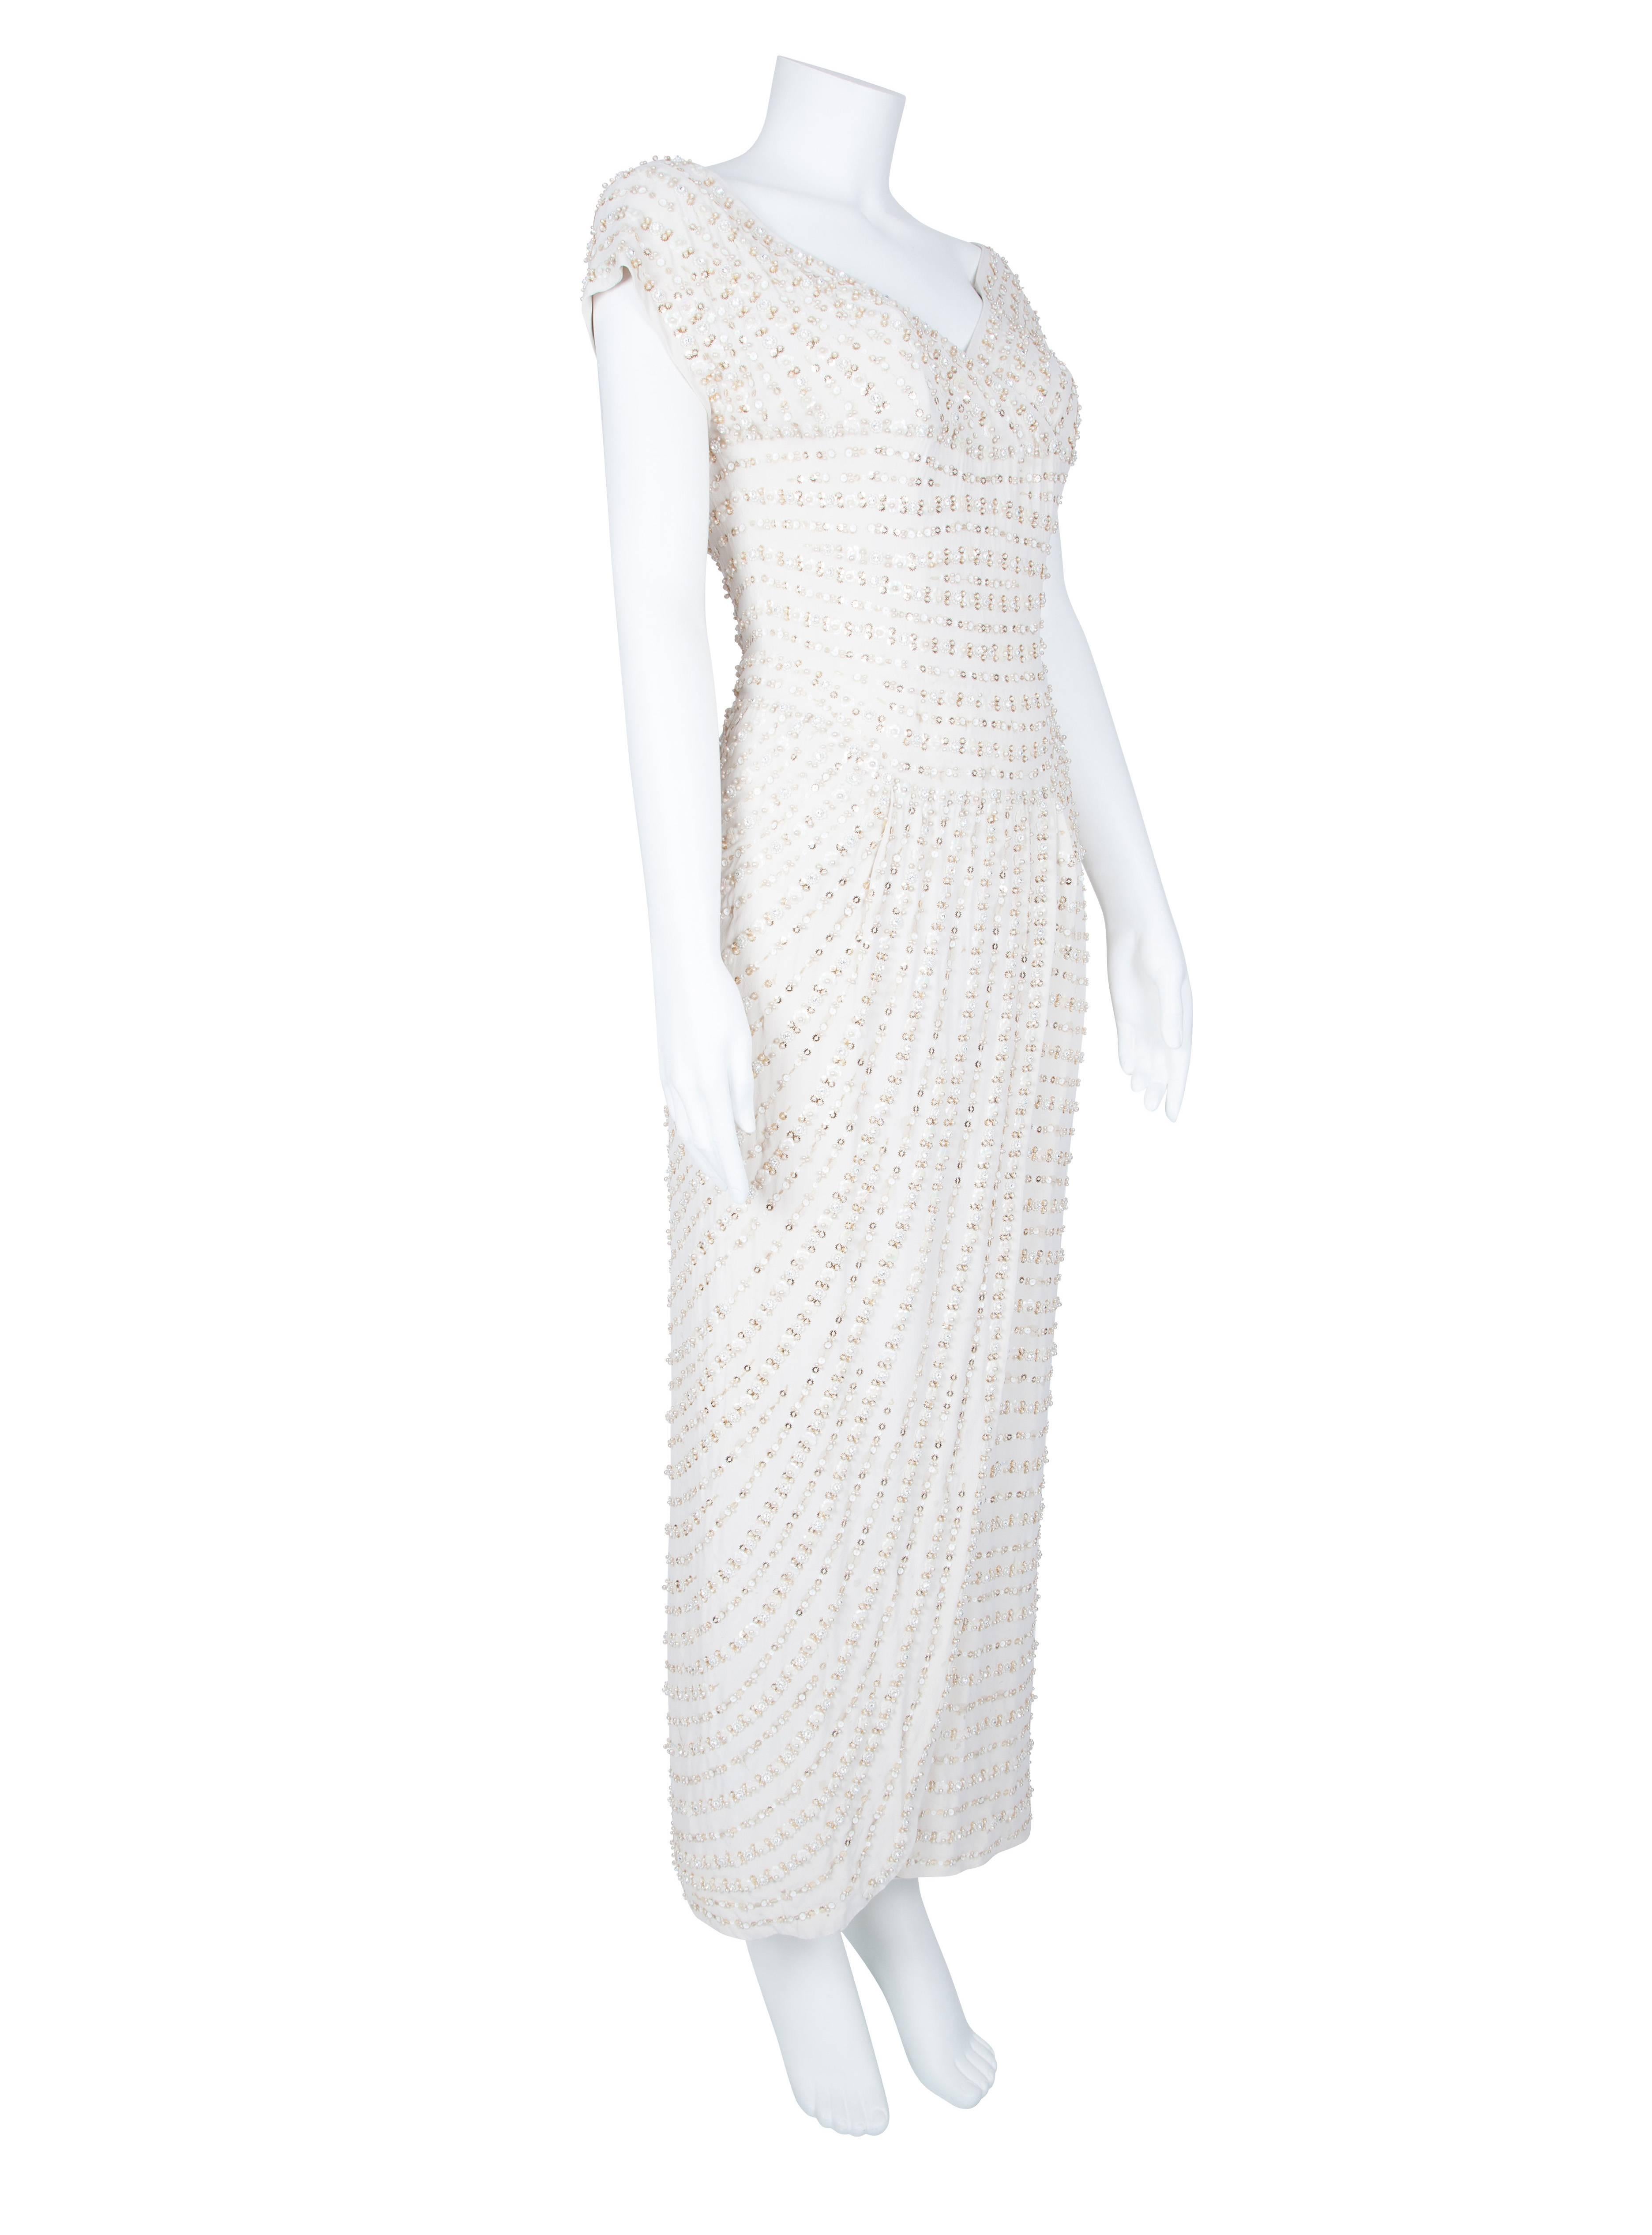 1950s Norman Hartnell Stunning Ivory Beaded Gown Approx Size UK 8 In Excellent Condition For Sale In London, GB